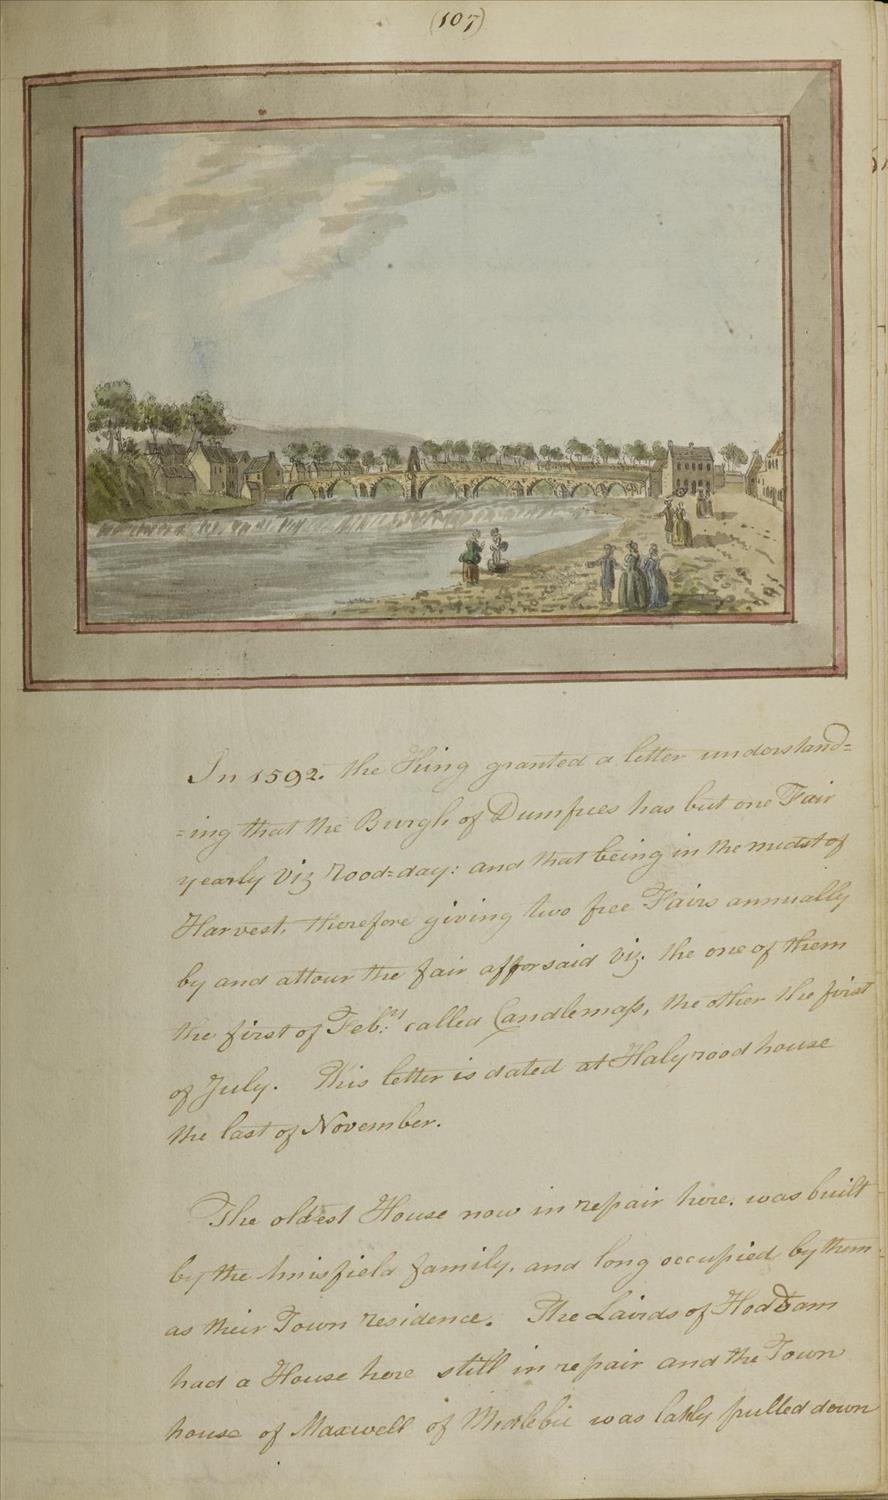 Drawing of Devorgilla Bridge, Dumfries from A collection on antiquities , Vol. 7, page 107, by Robert Riddell of Glenriddell.